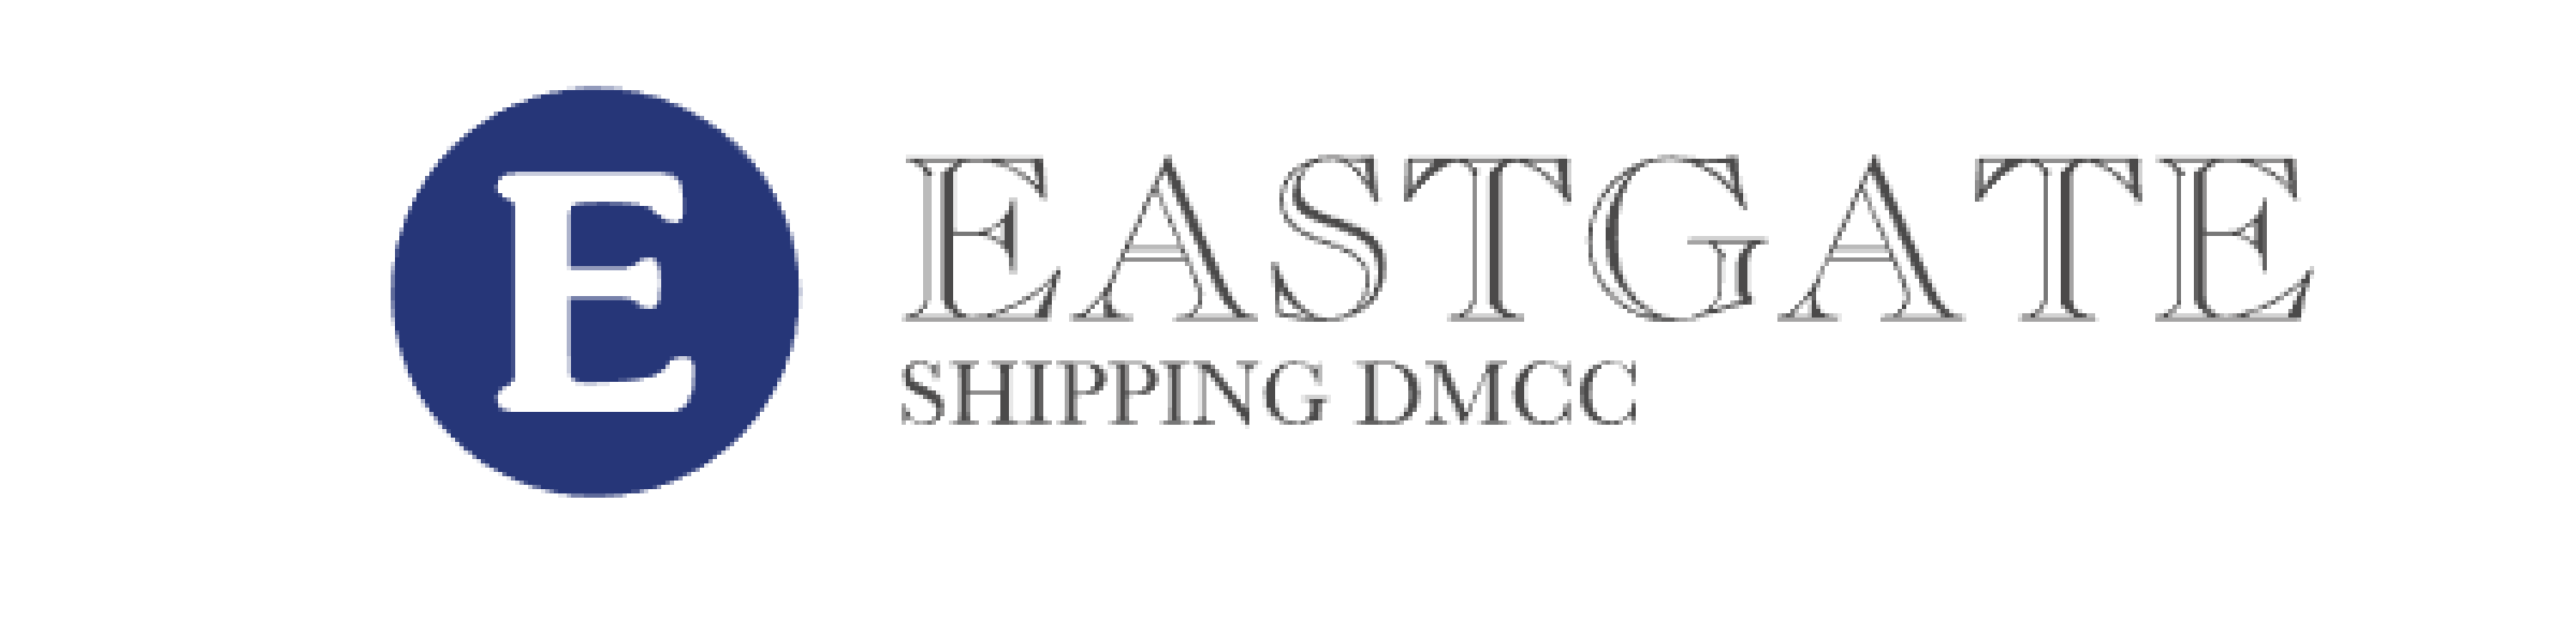 EASTGATE-SHIPPING-DMCC